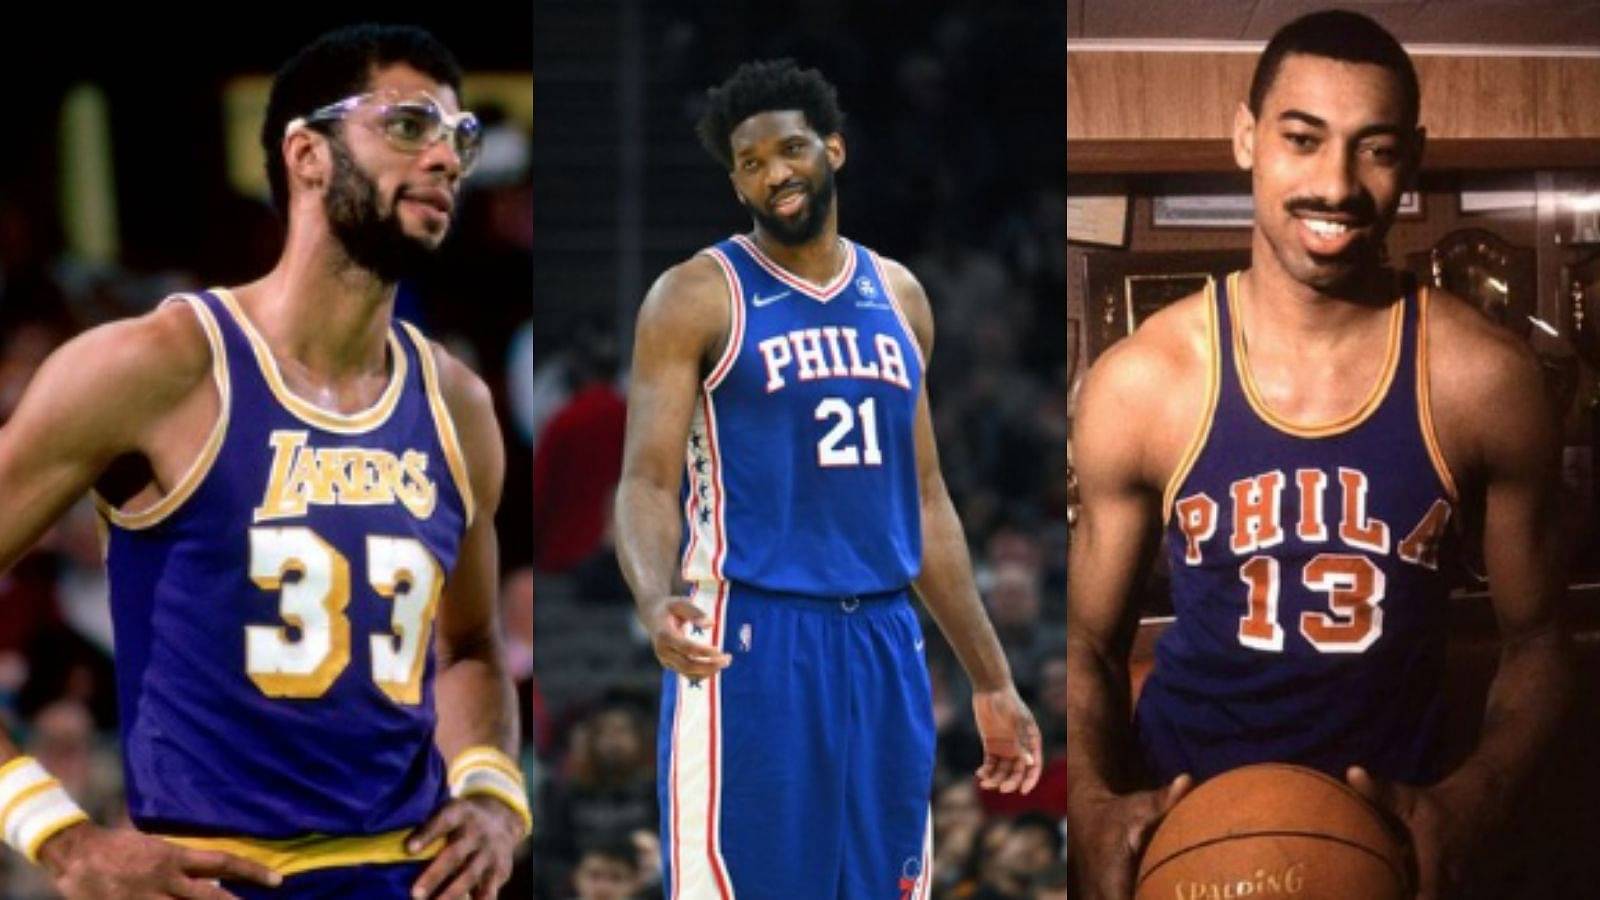 “Wilt Chamberlain, Kareem Abdul-Jabbar, Bob McAdoo are not even close”: Joel Embiid has off the chart efficiency as compared to other top-scoring Centers